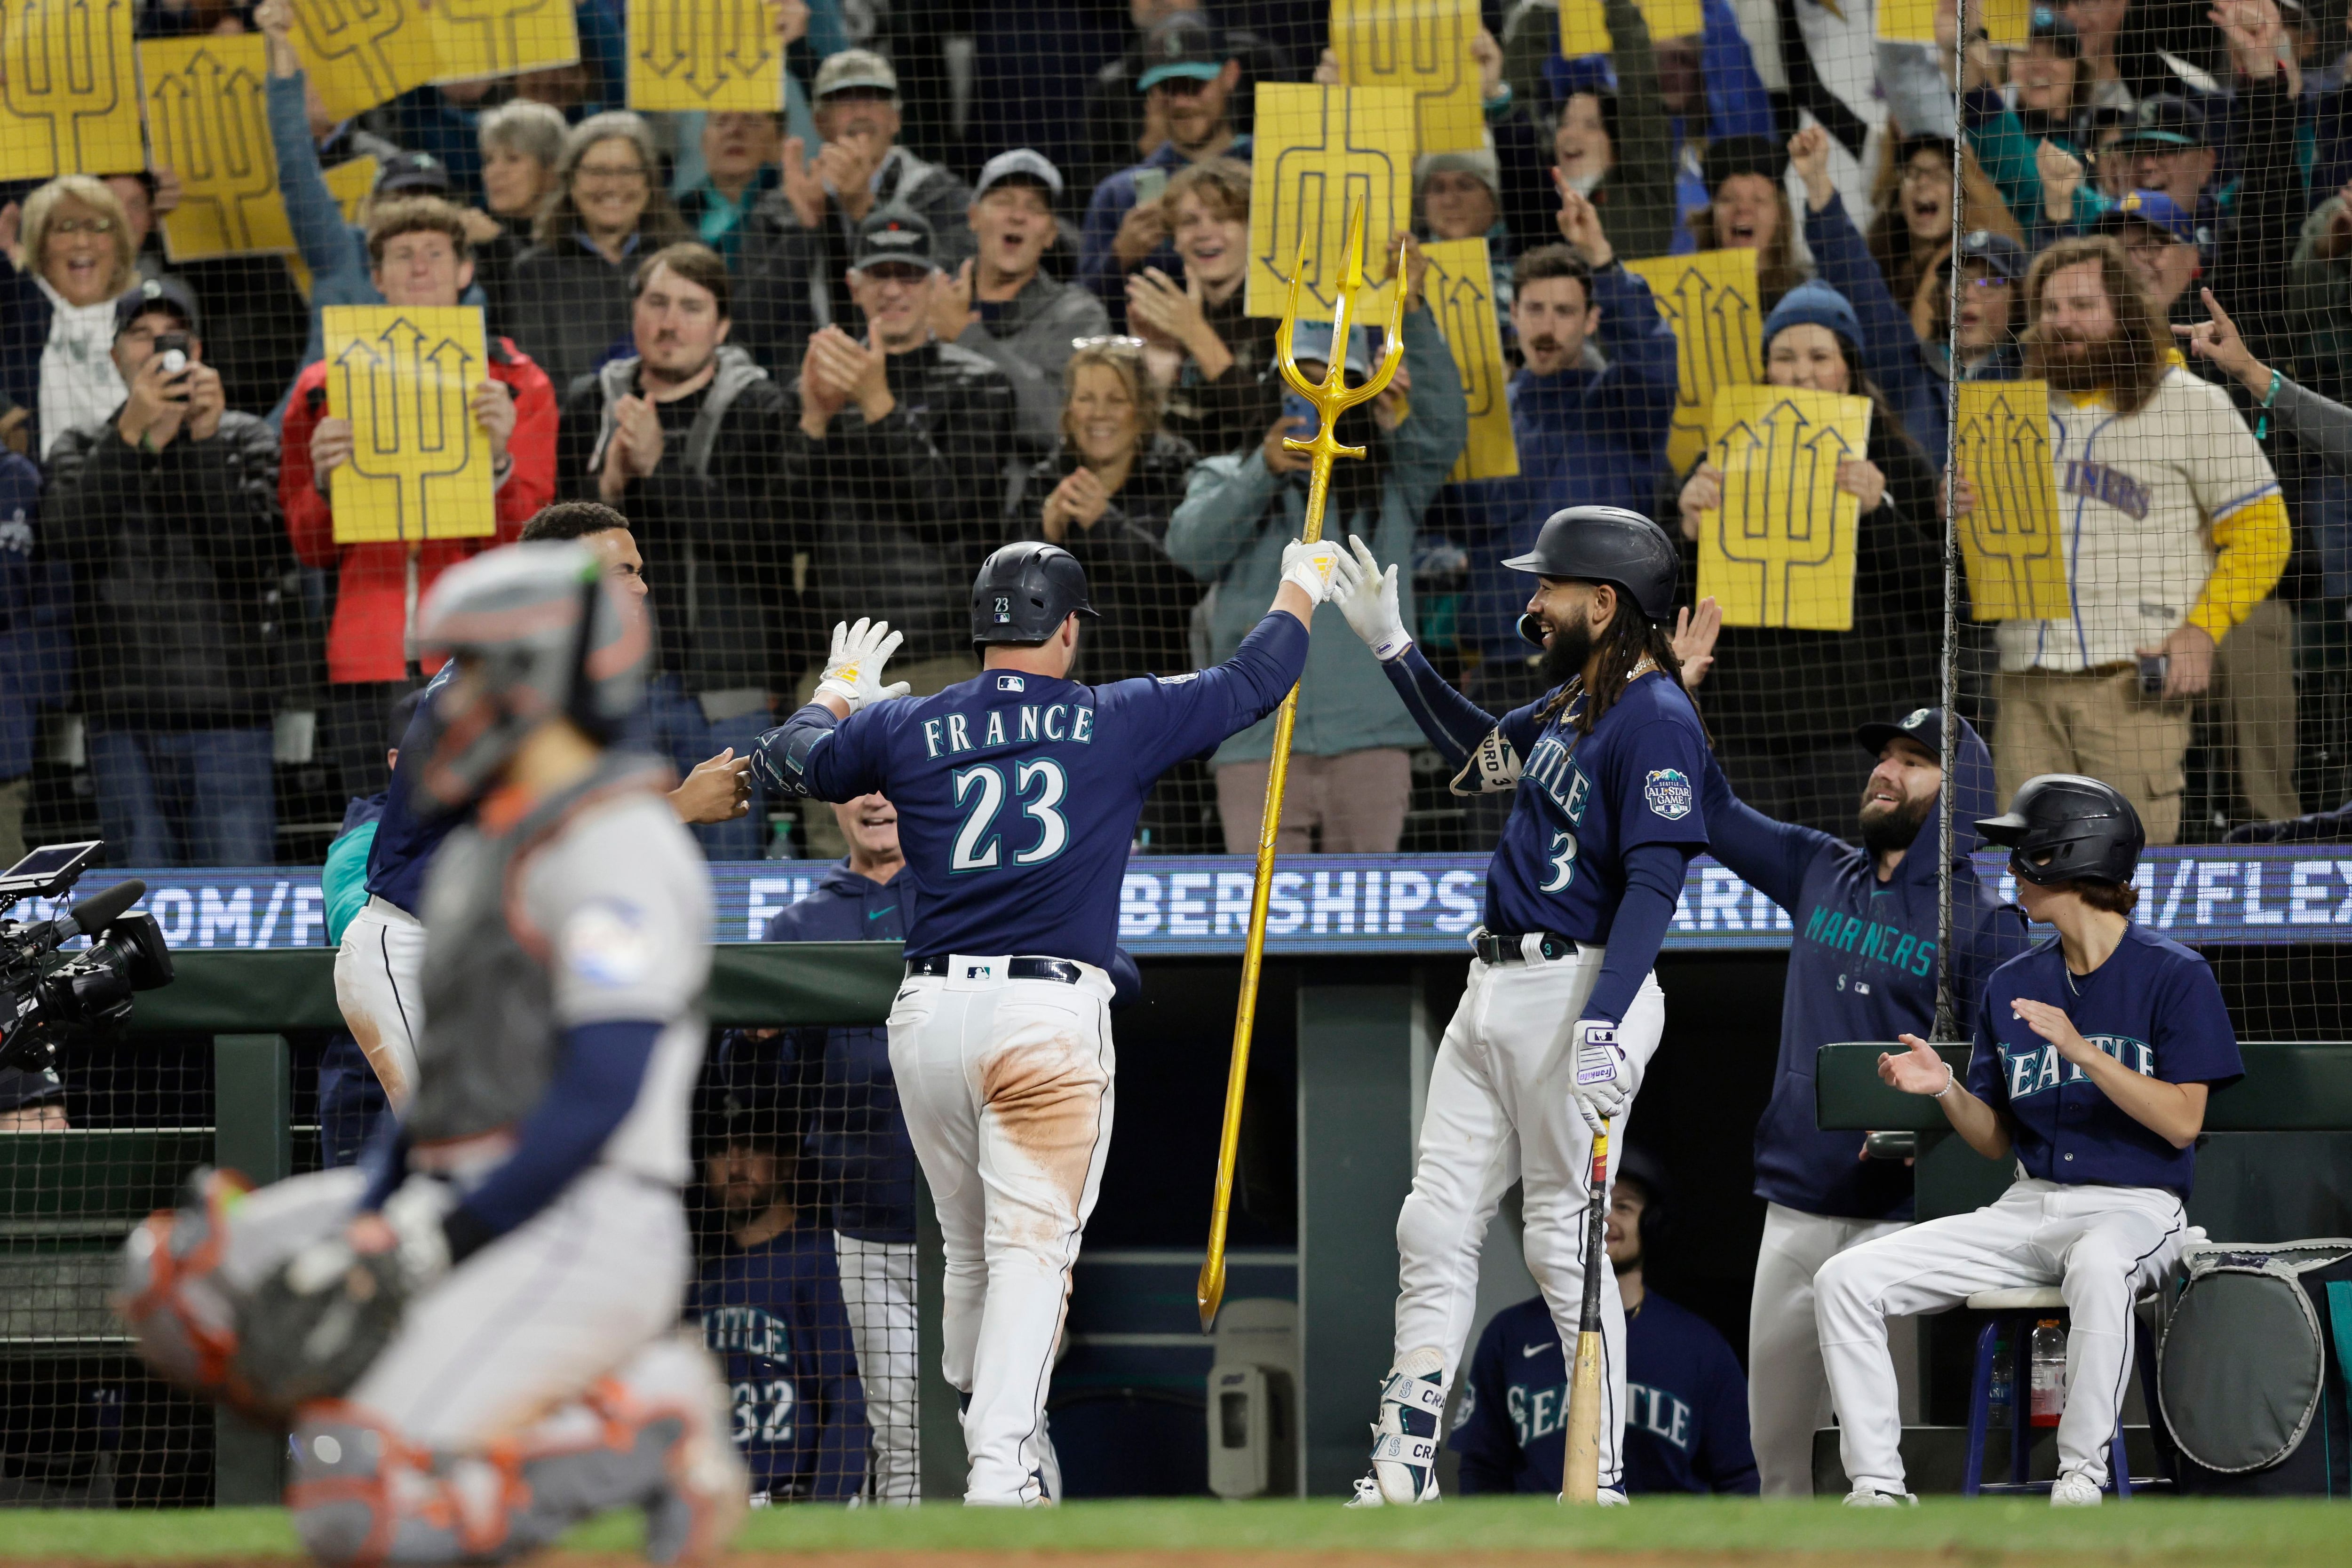 A casual fan's guide to the Mariners' playoff run